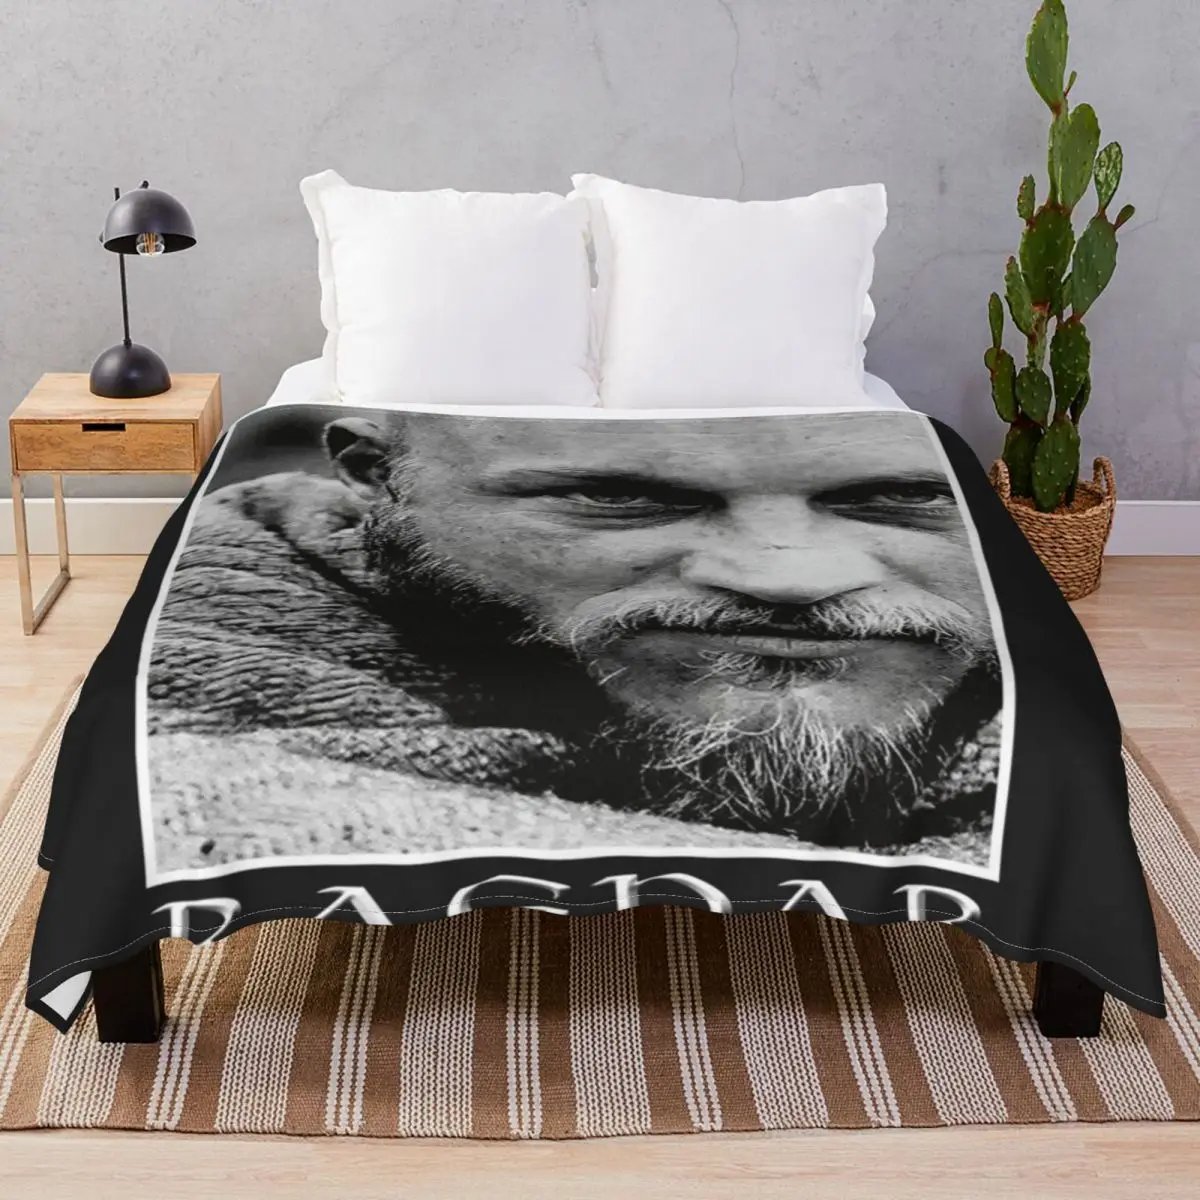 Ragnar Lothbrok Blanket Flannel Printed Lightweight Thin Throw Blankets for Bed Home Couch Camp Cinema